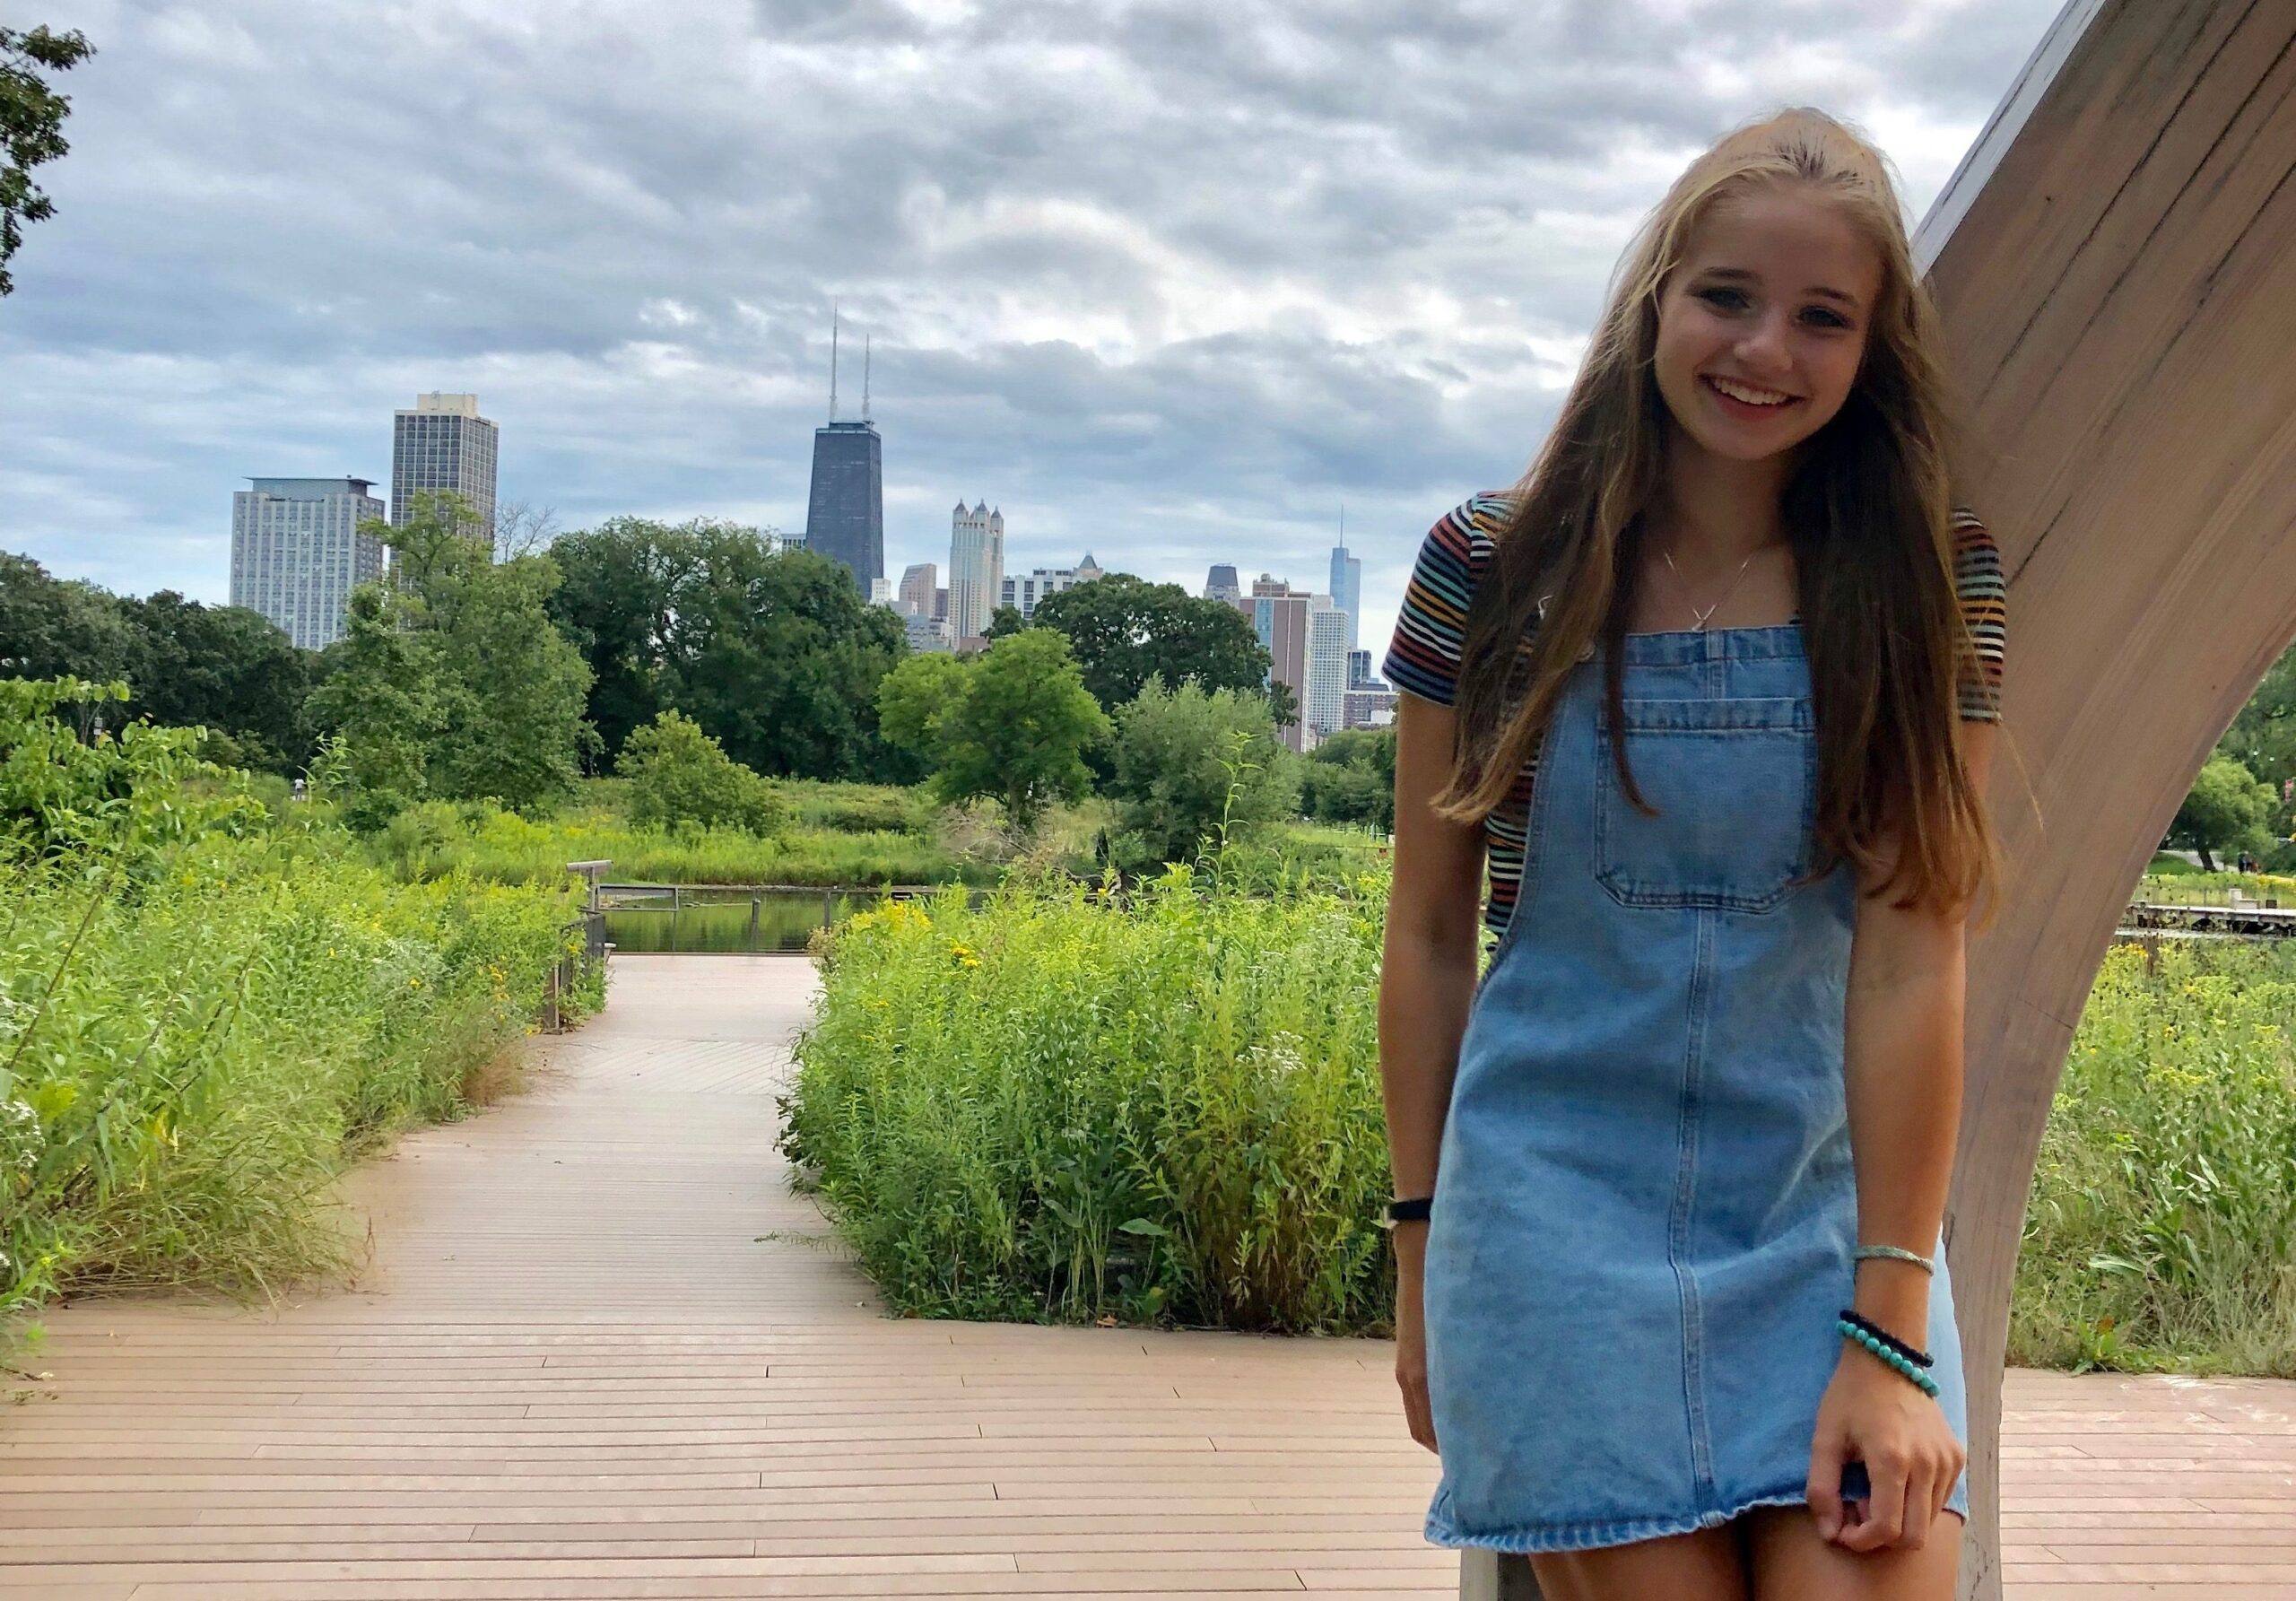 A young woman standing on a park pathway with the Chicago skyline behind her.